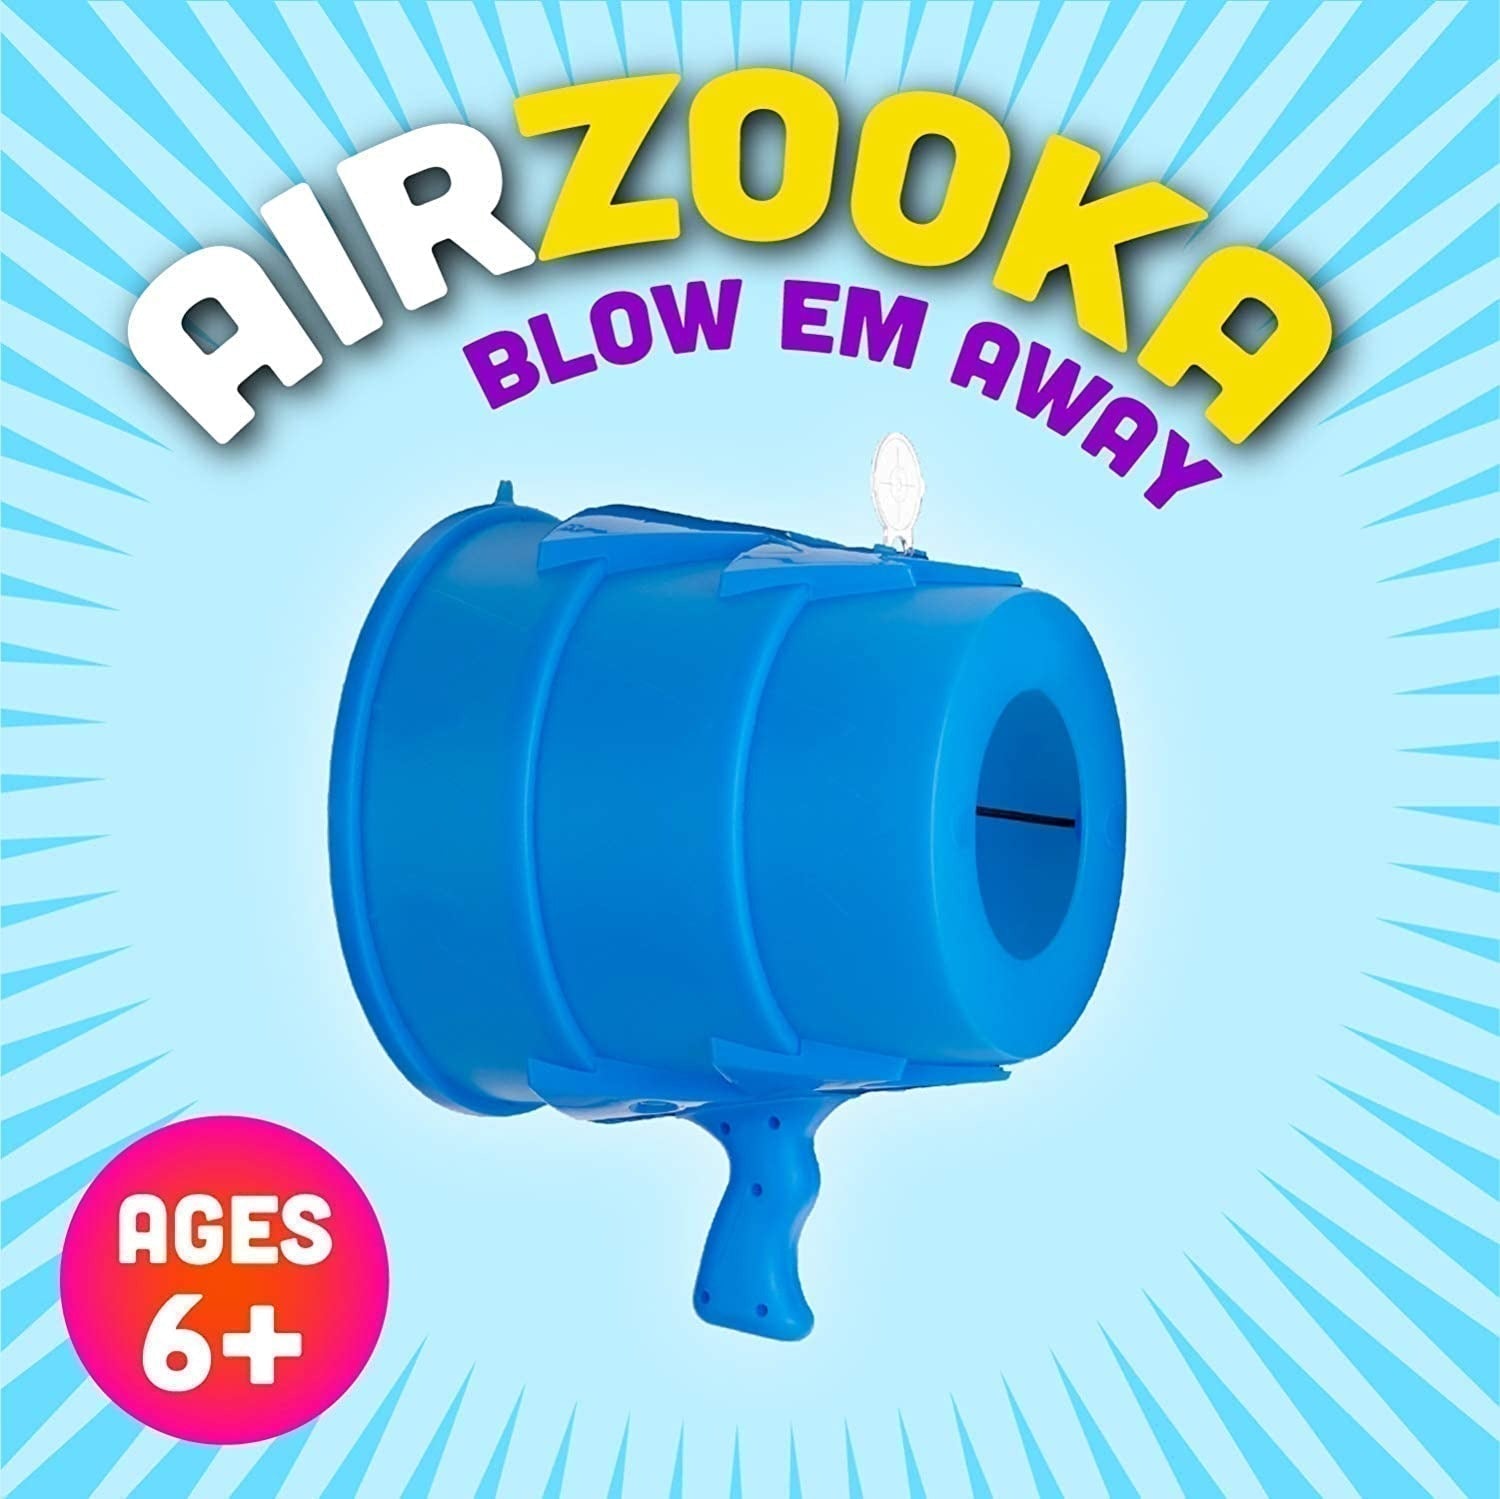 Airzooka, It's so simple, you won't need anything but the Airzooka itself. The bucket-shaped plastic container blows a ball of air, sending papers flying off desks, messing up hair, knocking light targets off their bases. To use it, just flip up the site, grip the handle with one hand and the air launcher with the other, and pull straight back on the air launcher. Once you release, the air blasts through the atmosphere, causing a wind storm whenever you want! The pop-up site can even help you improve your a